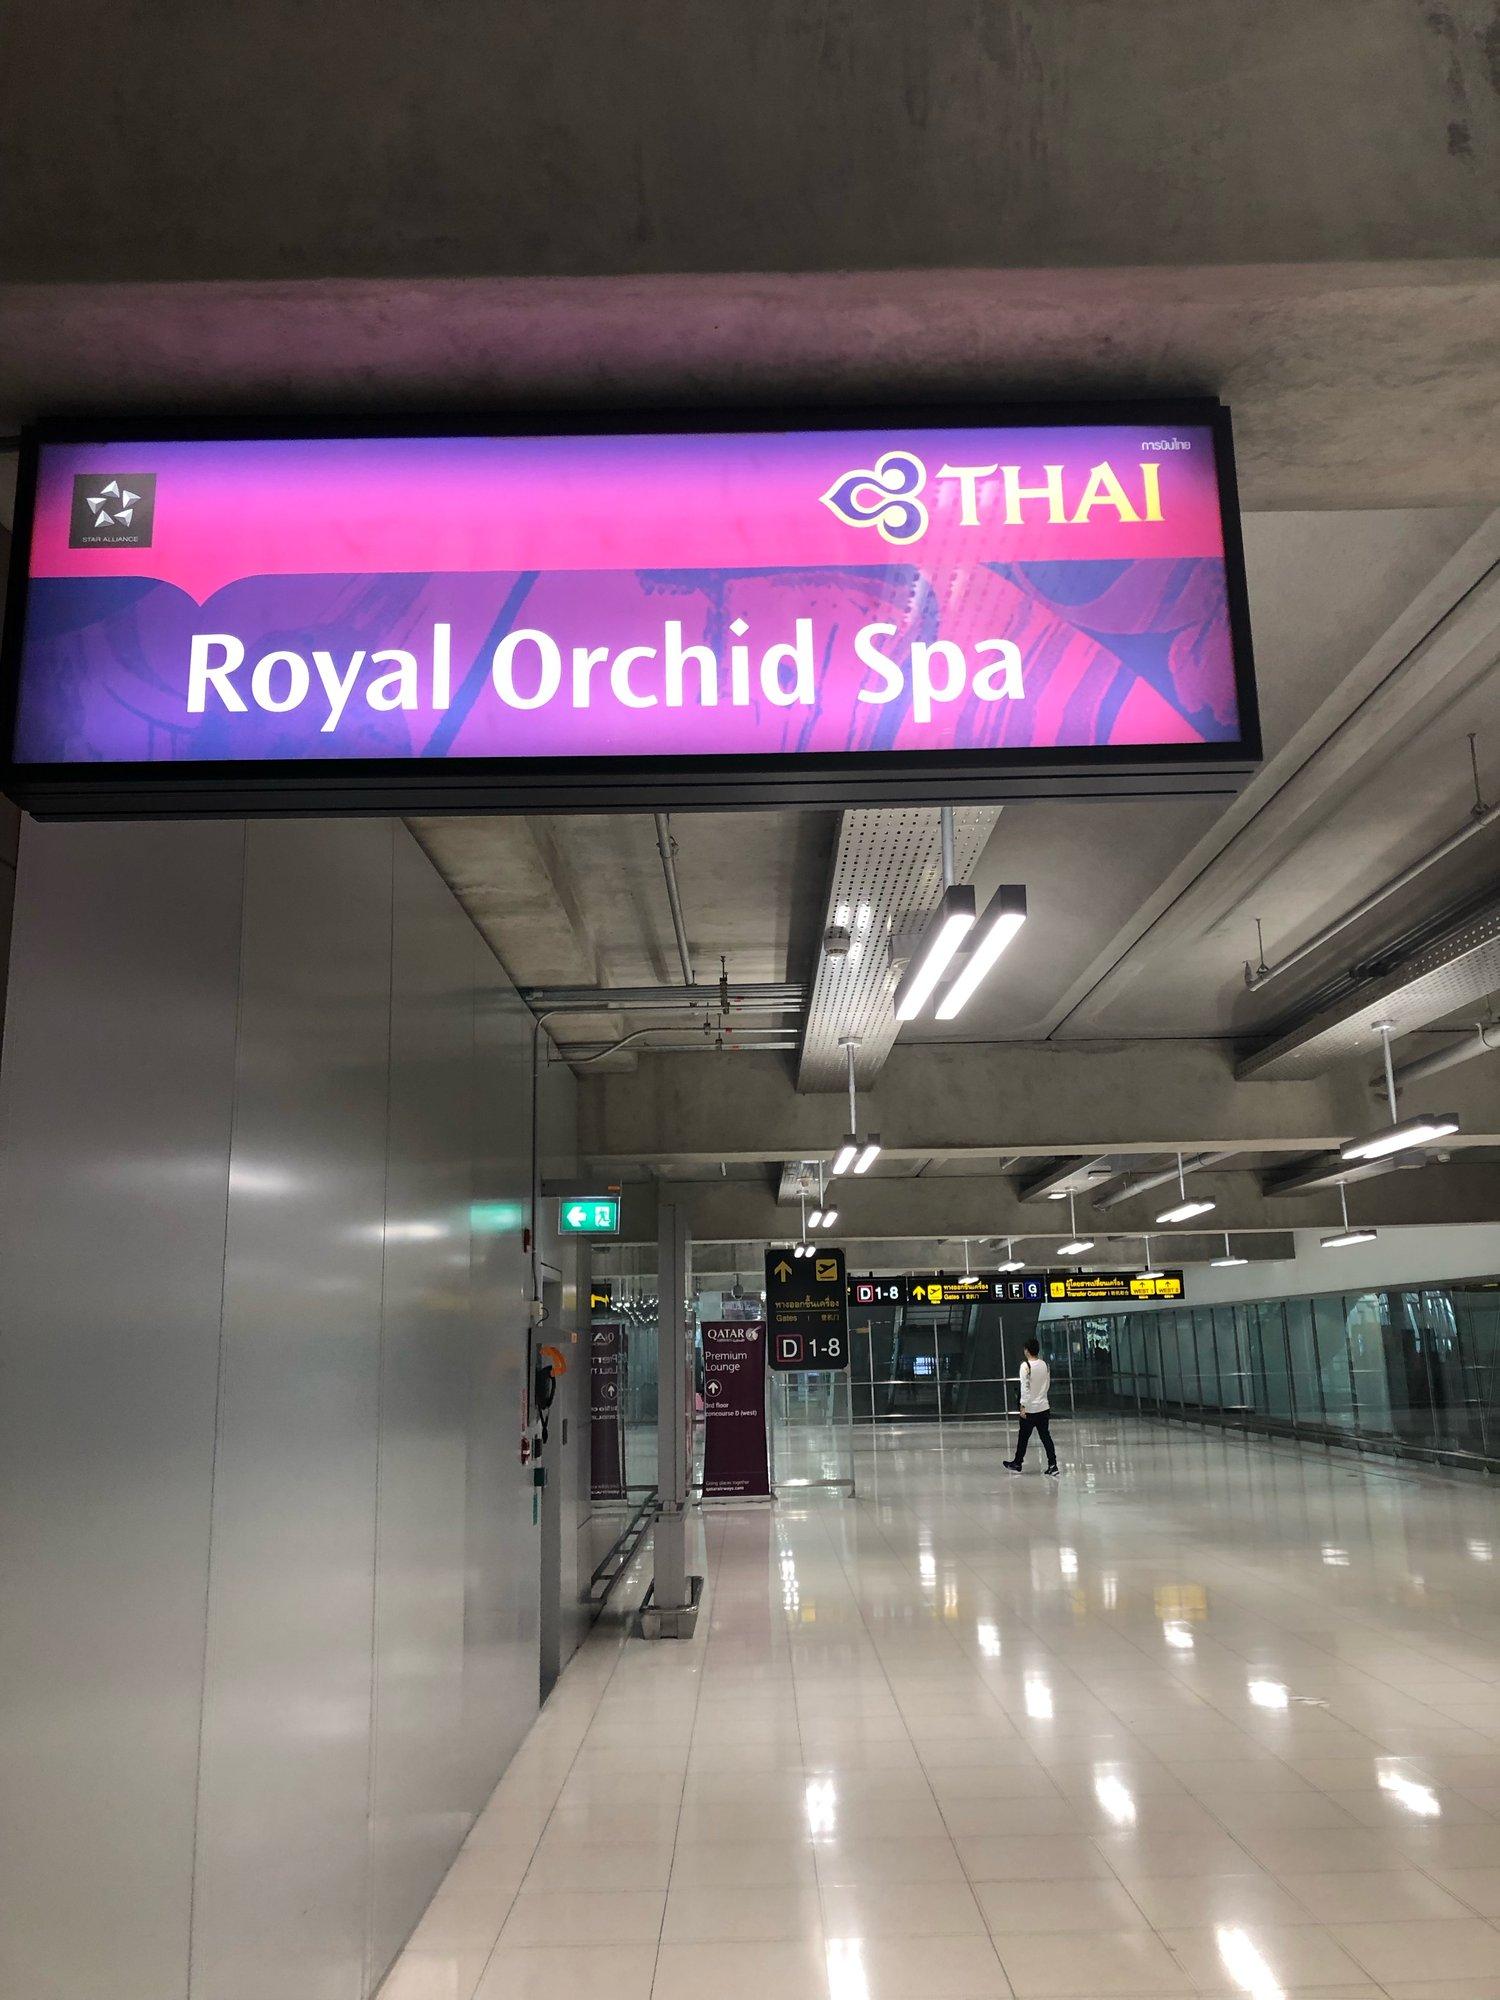 Thai Airways Royal Orchid Spa  image 25 of 25